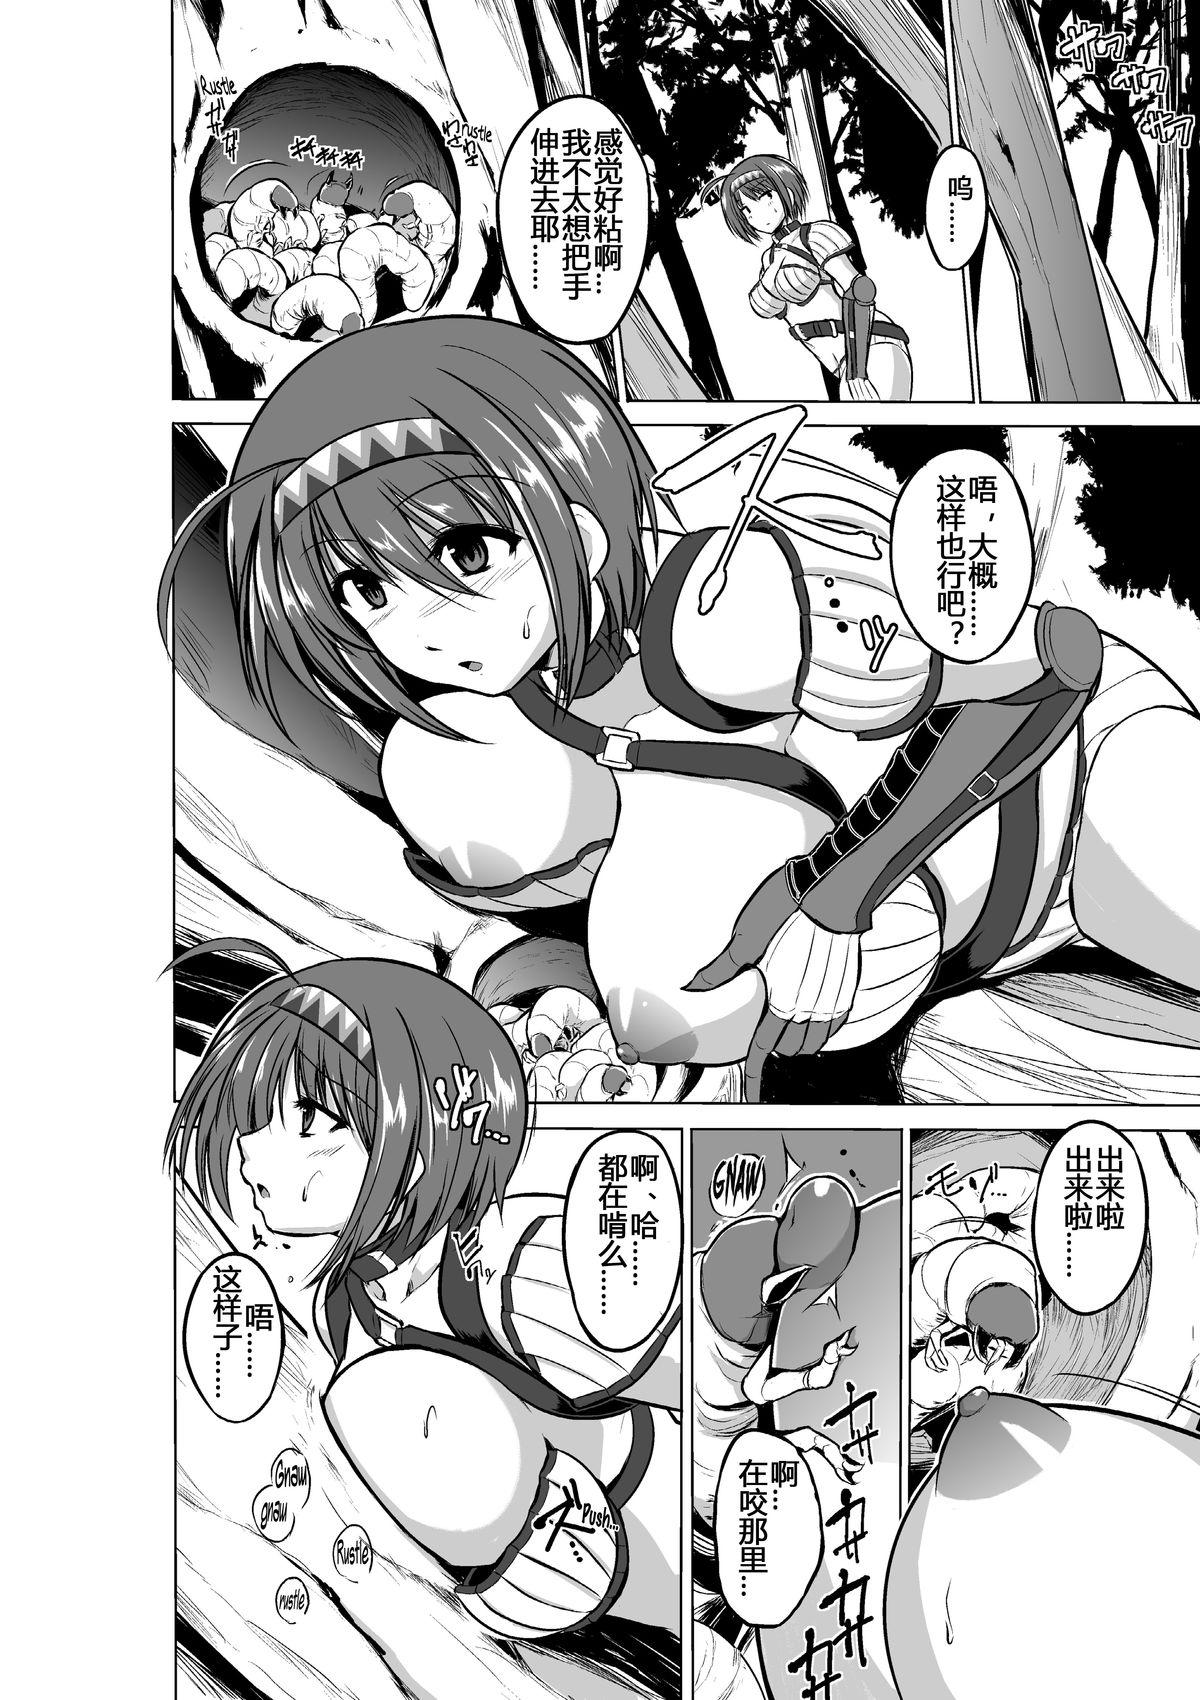 Hard Fuck Dungeon Travelers - Chie no Himegoto - Toheart2 Esposa - Page 6